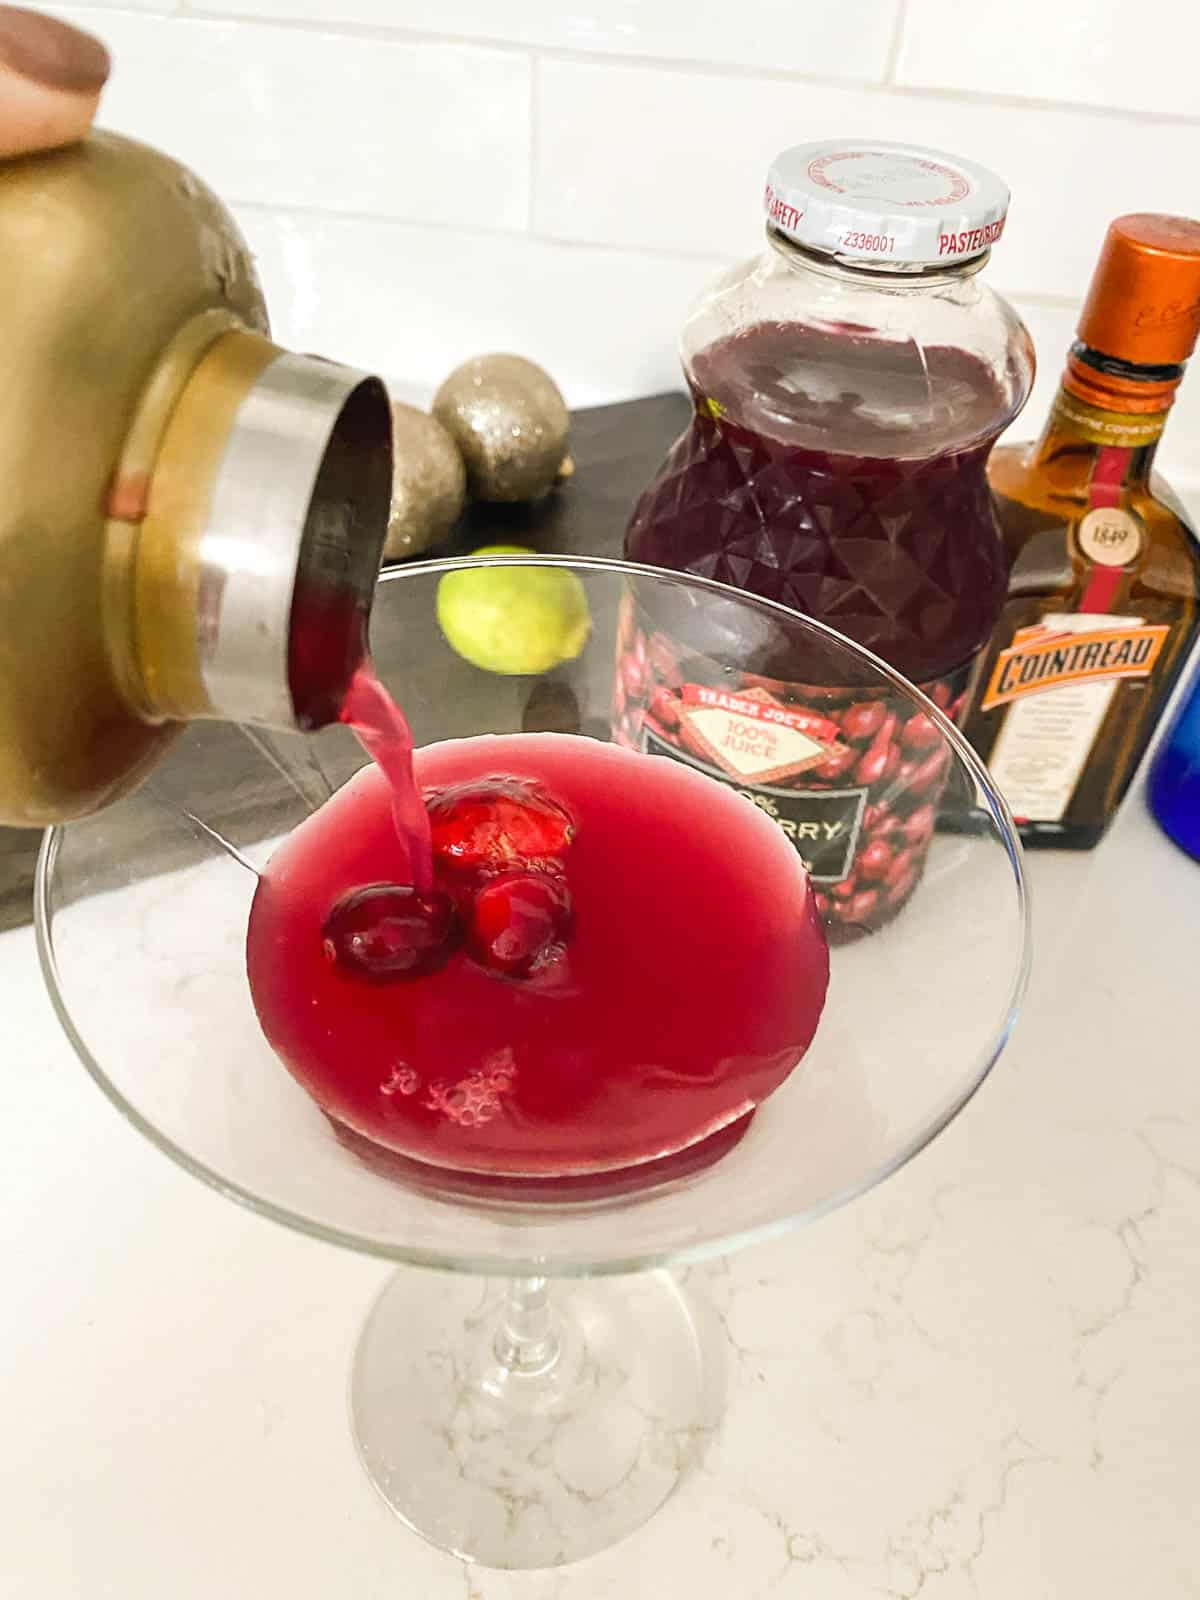 A red cocktail being poured into a martini glass.